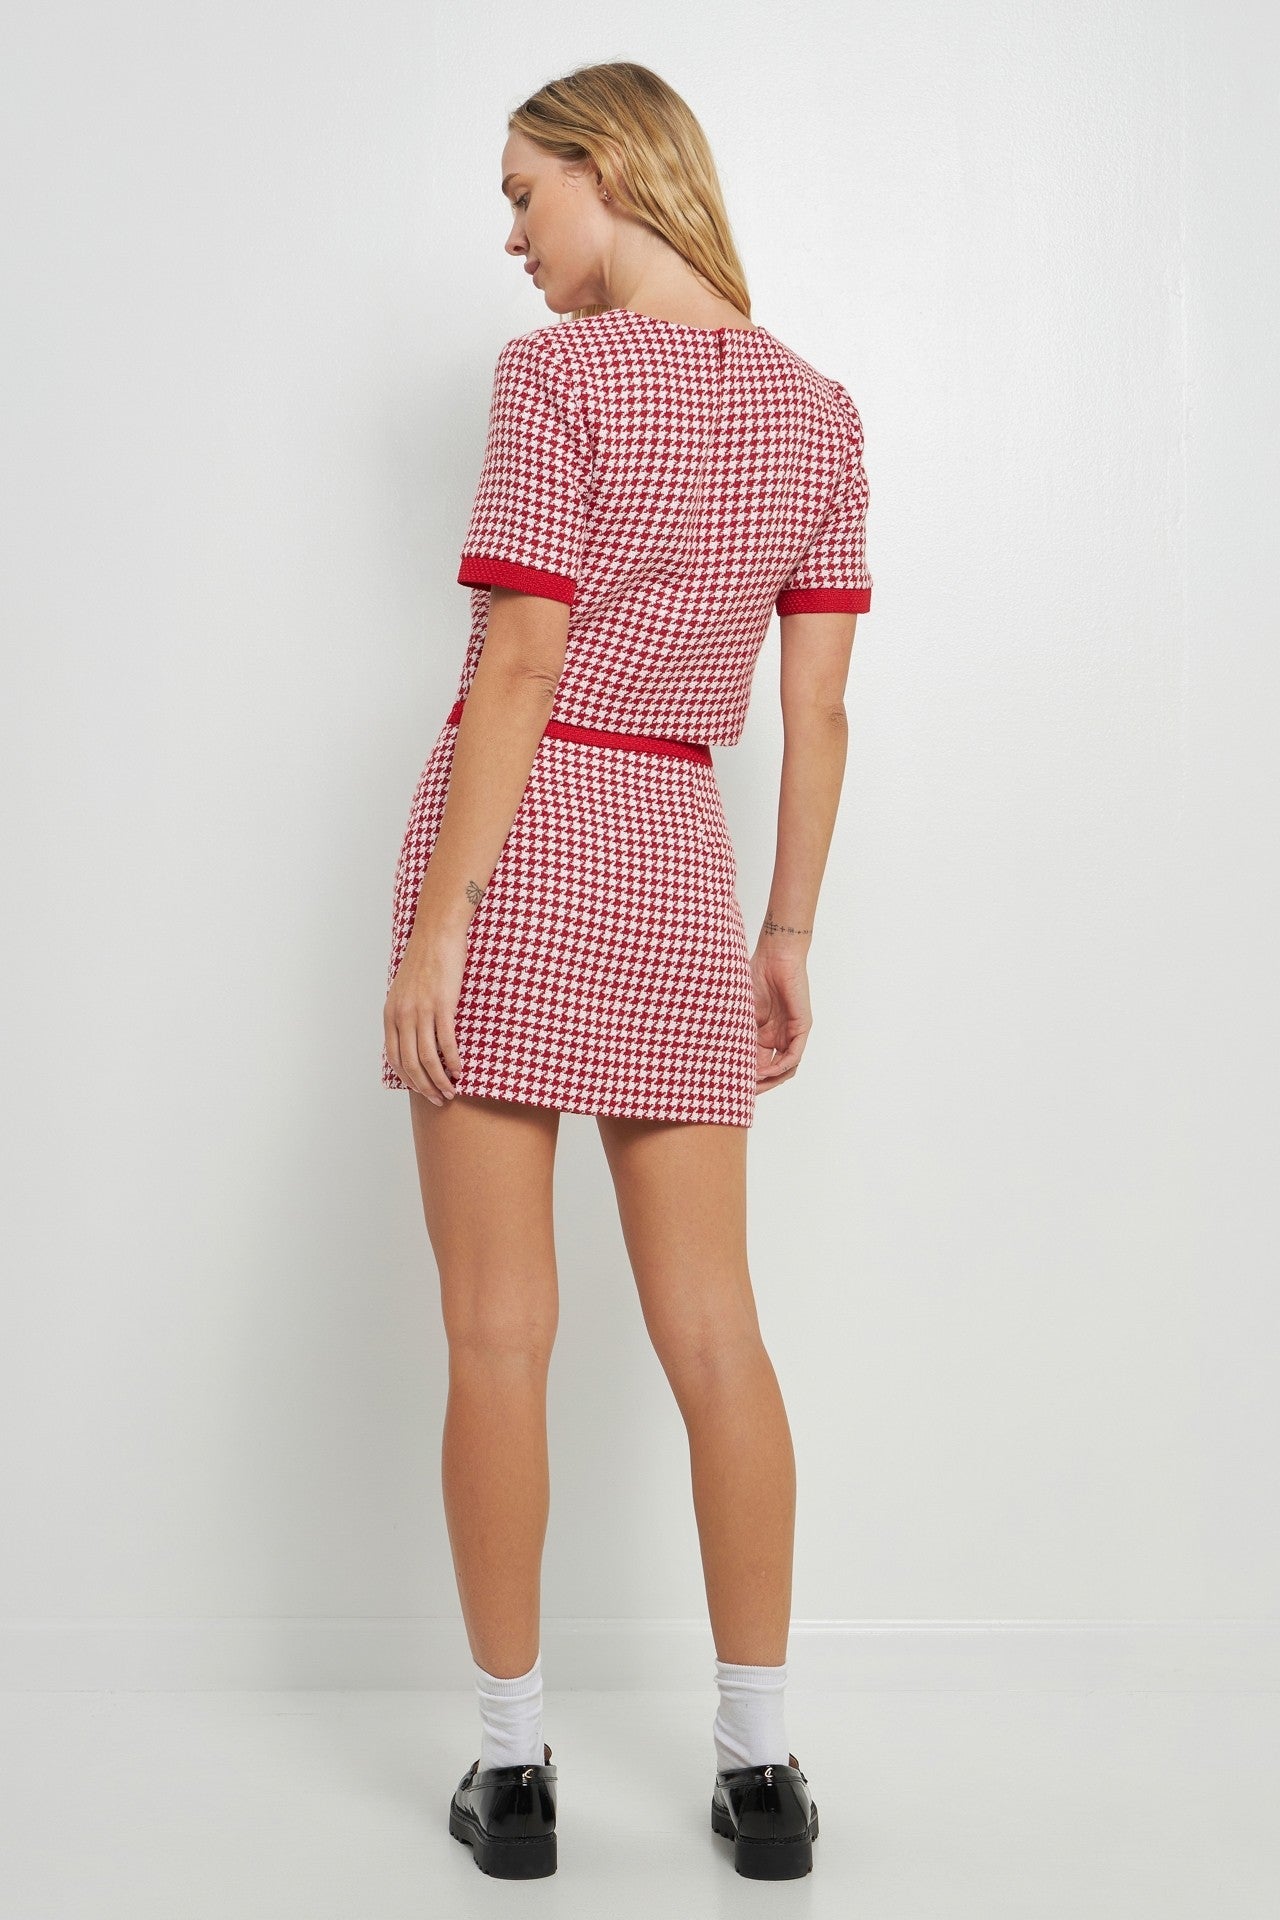 Model is wearing Scarlett Houndstooth Tweed Skirt in red and white back view